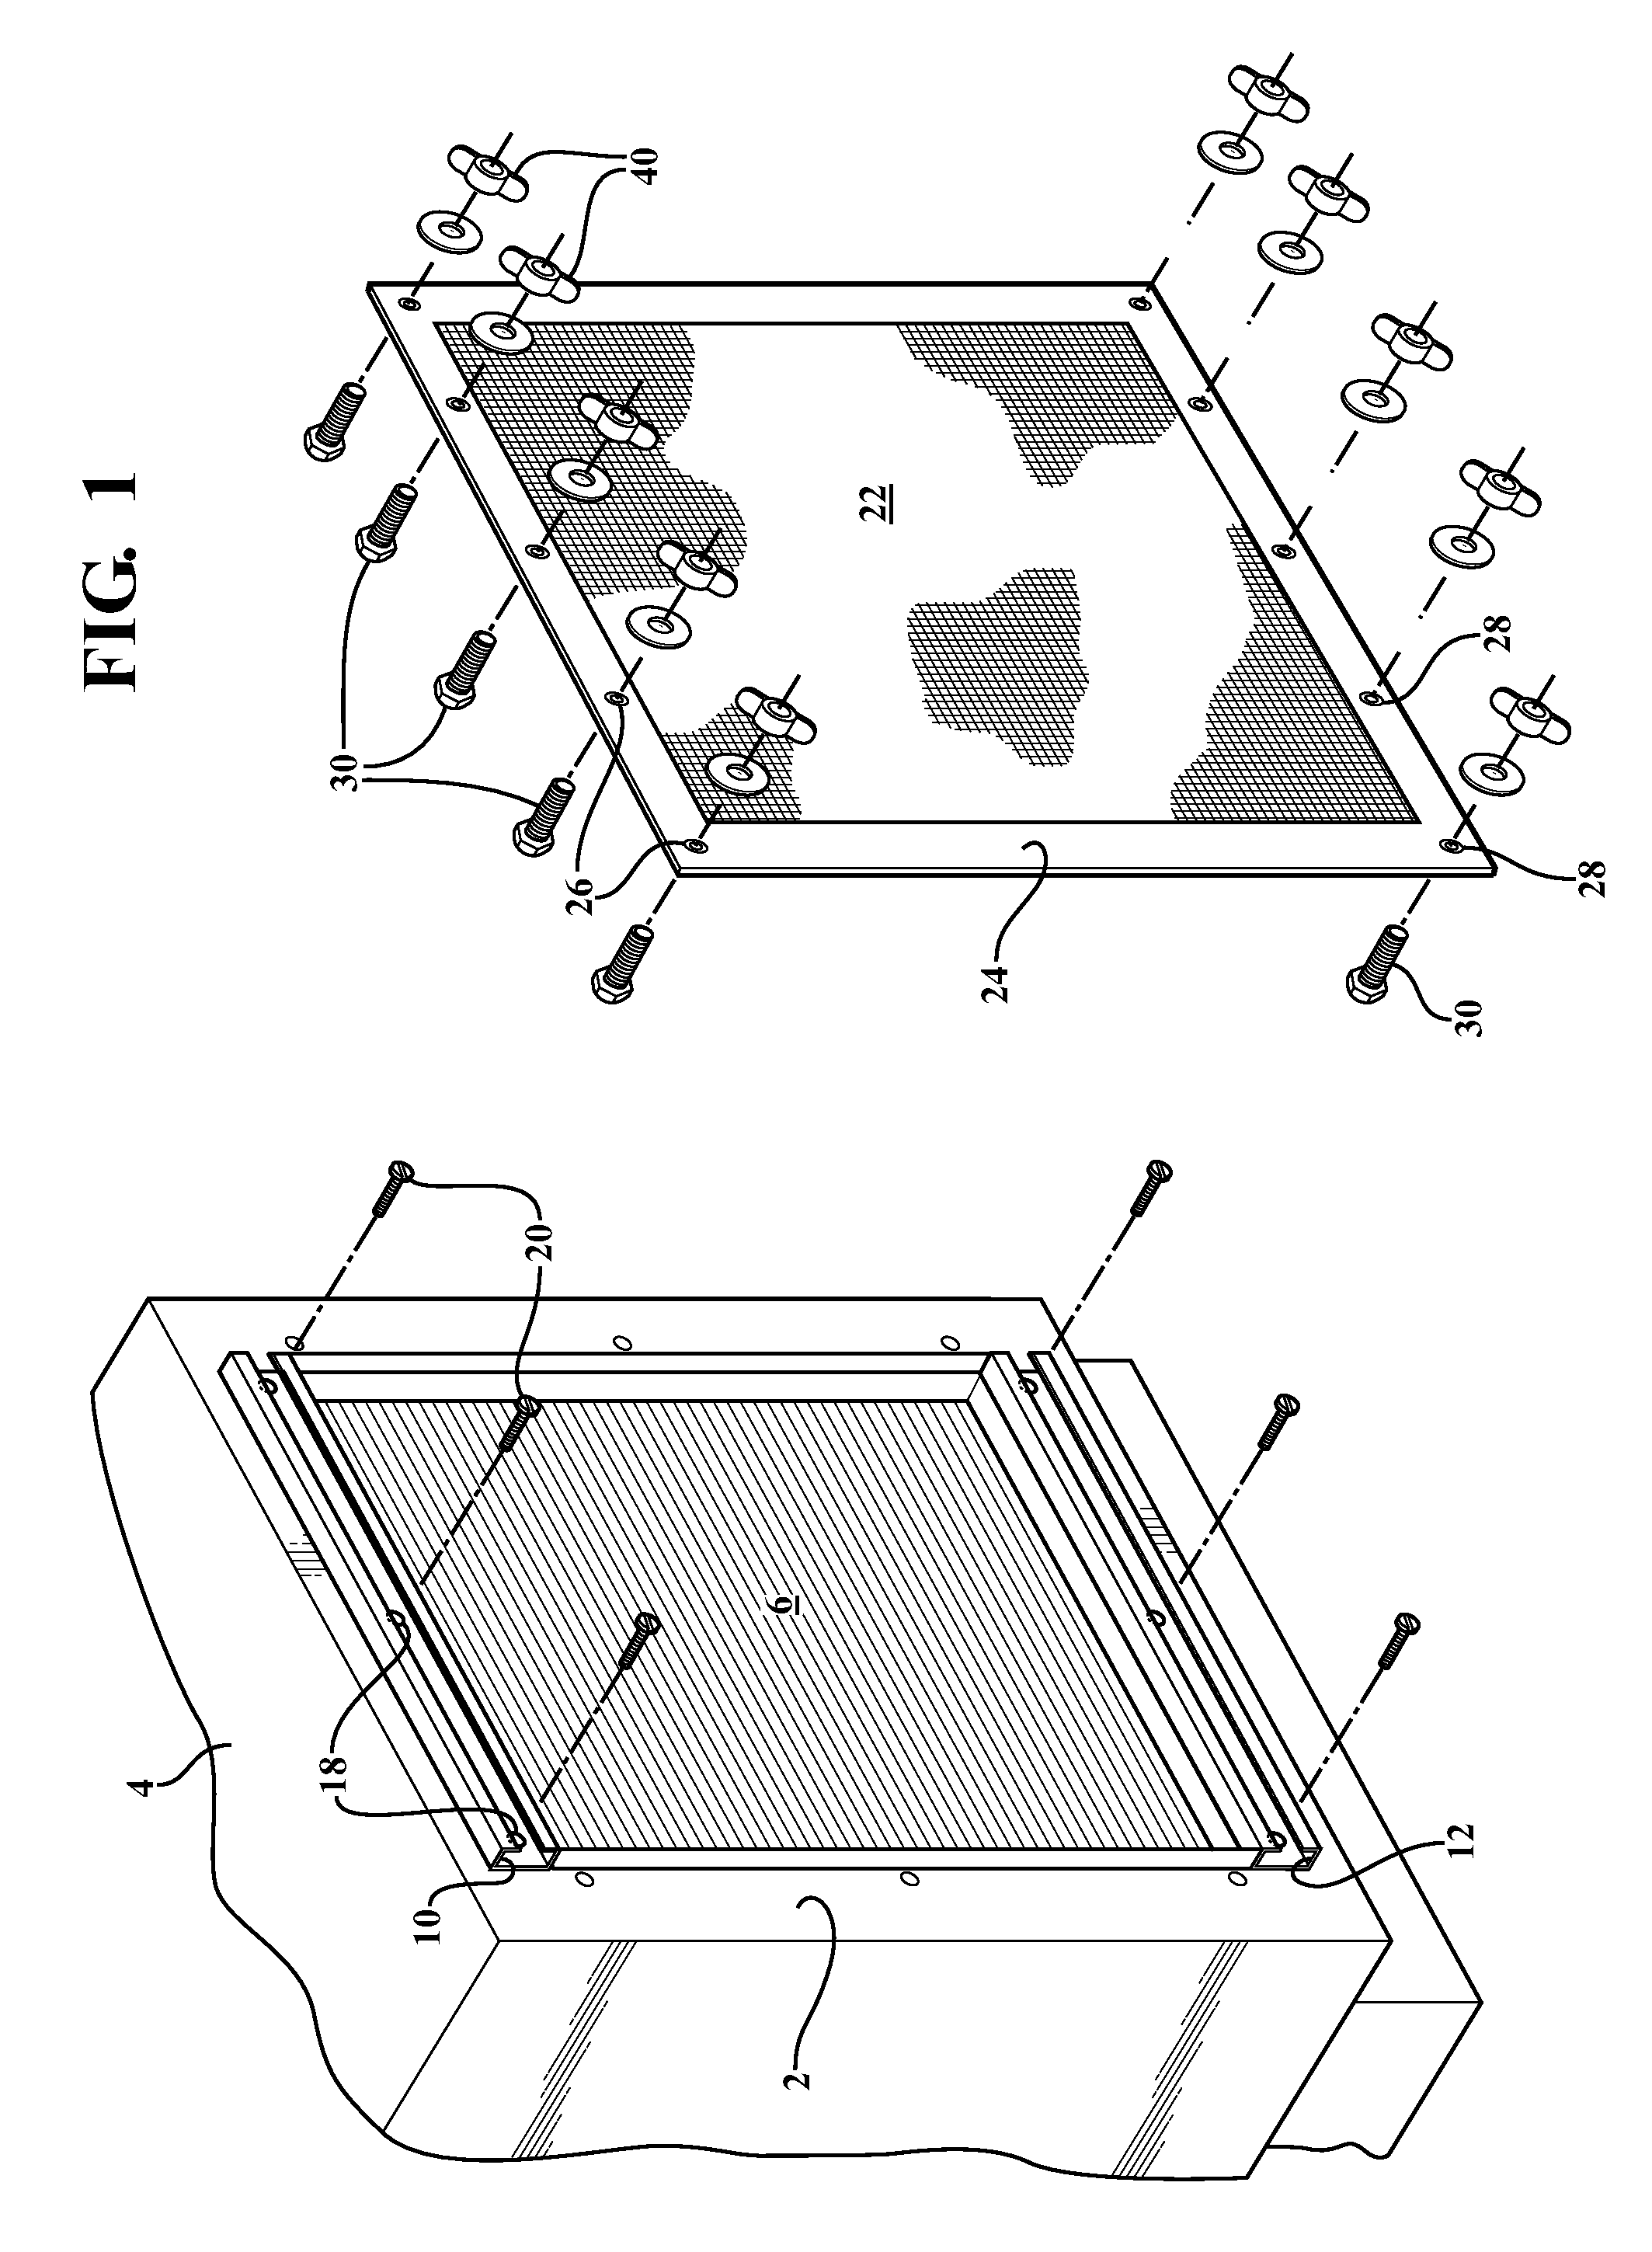 Channel lock filter fastening system for use with an air intake structure